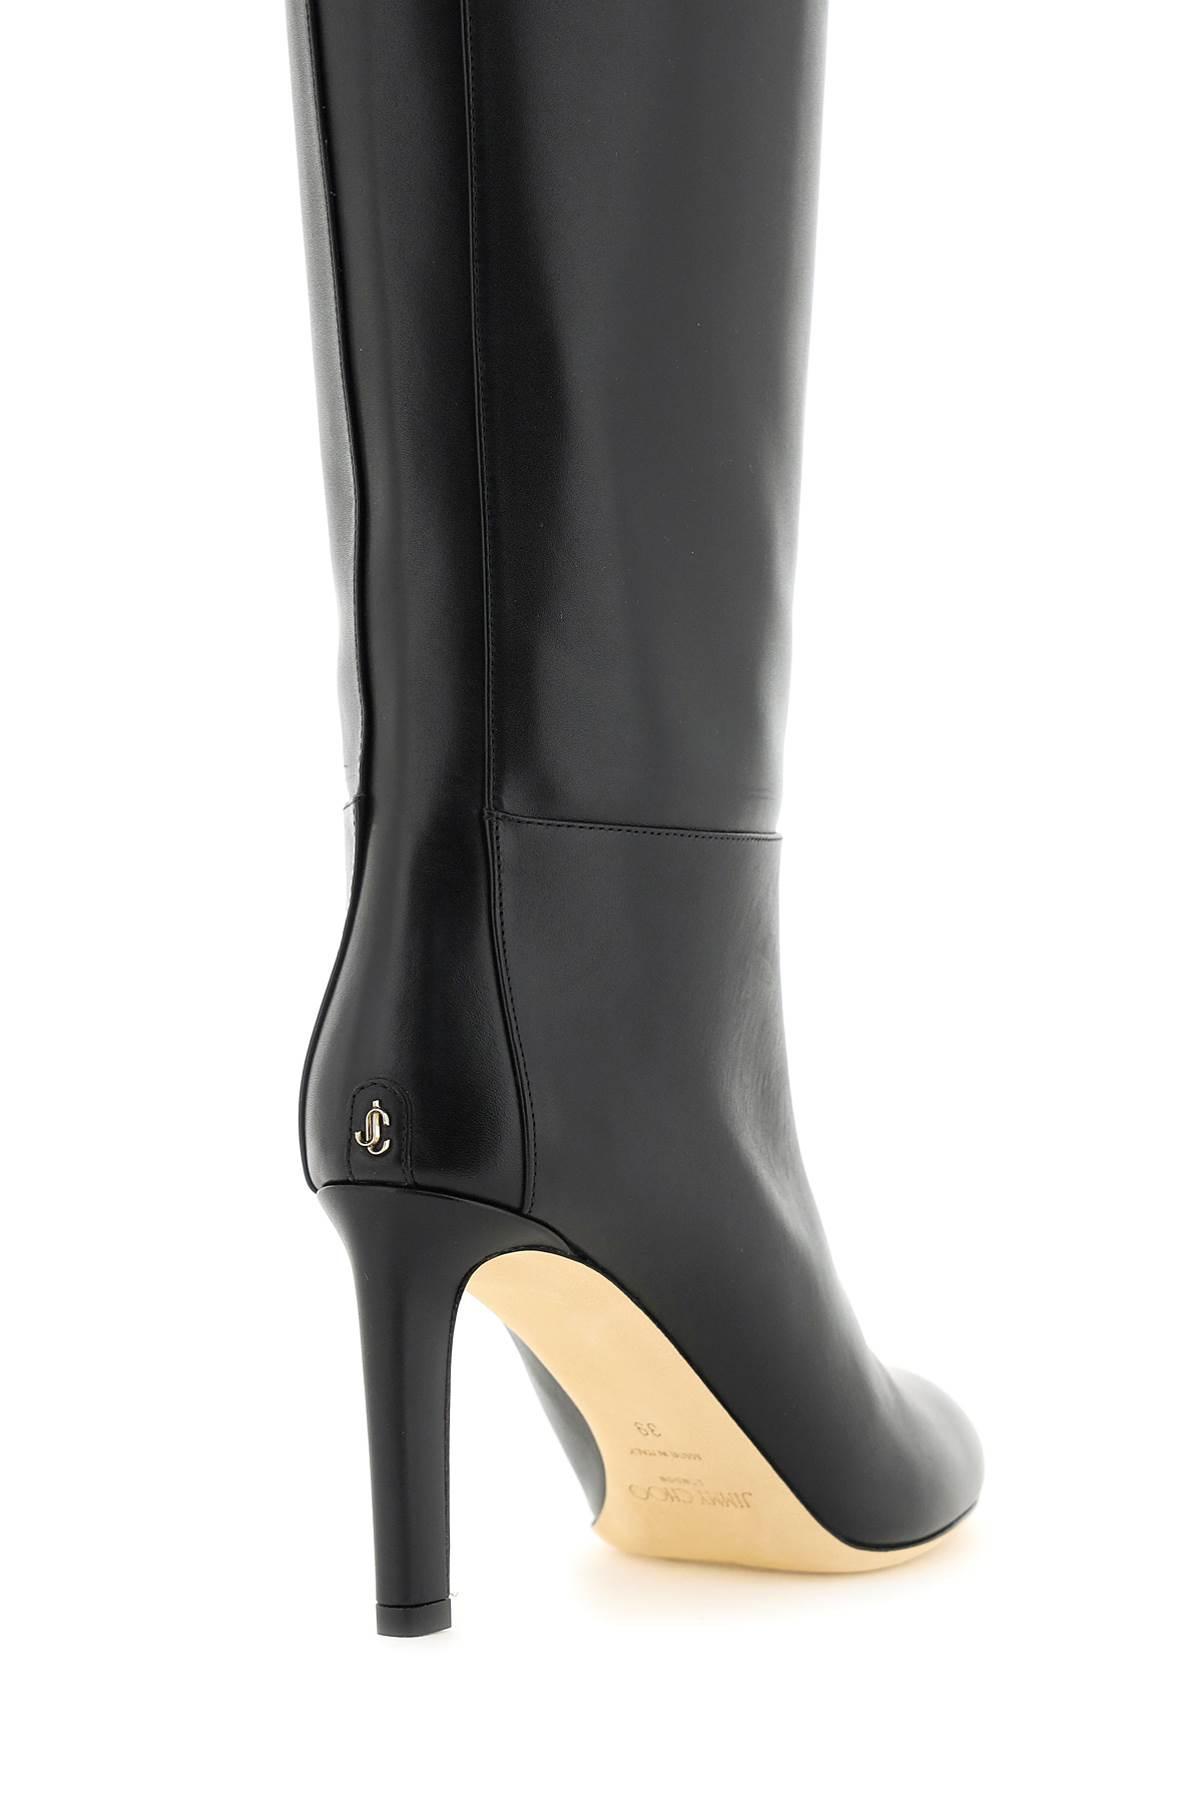 Jimmy Choo Karter 85 Leather Boots in Black | Lyst